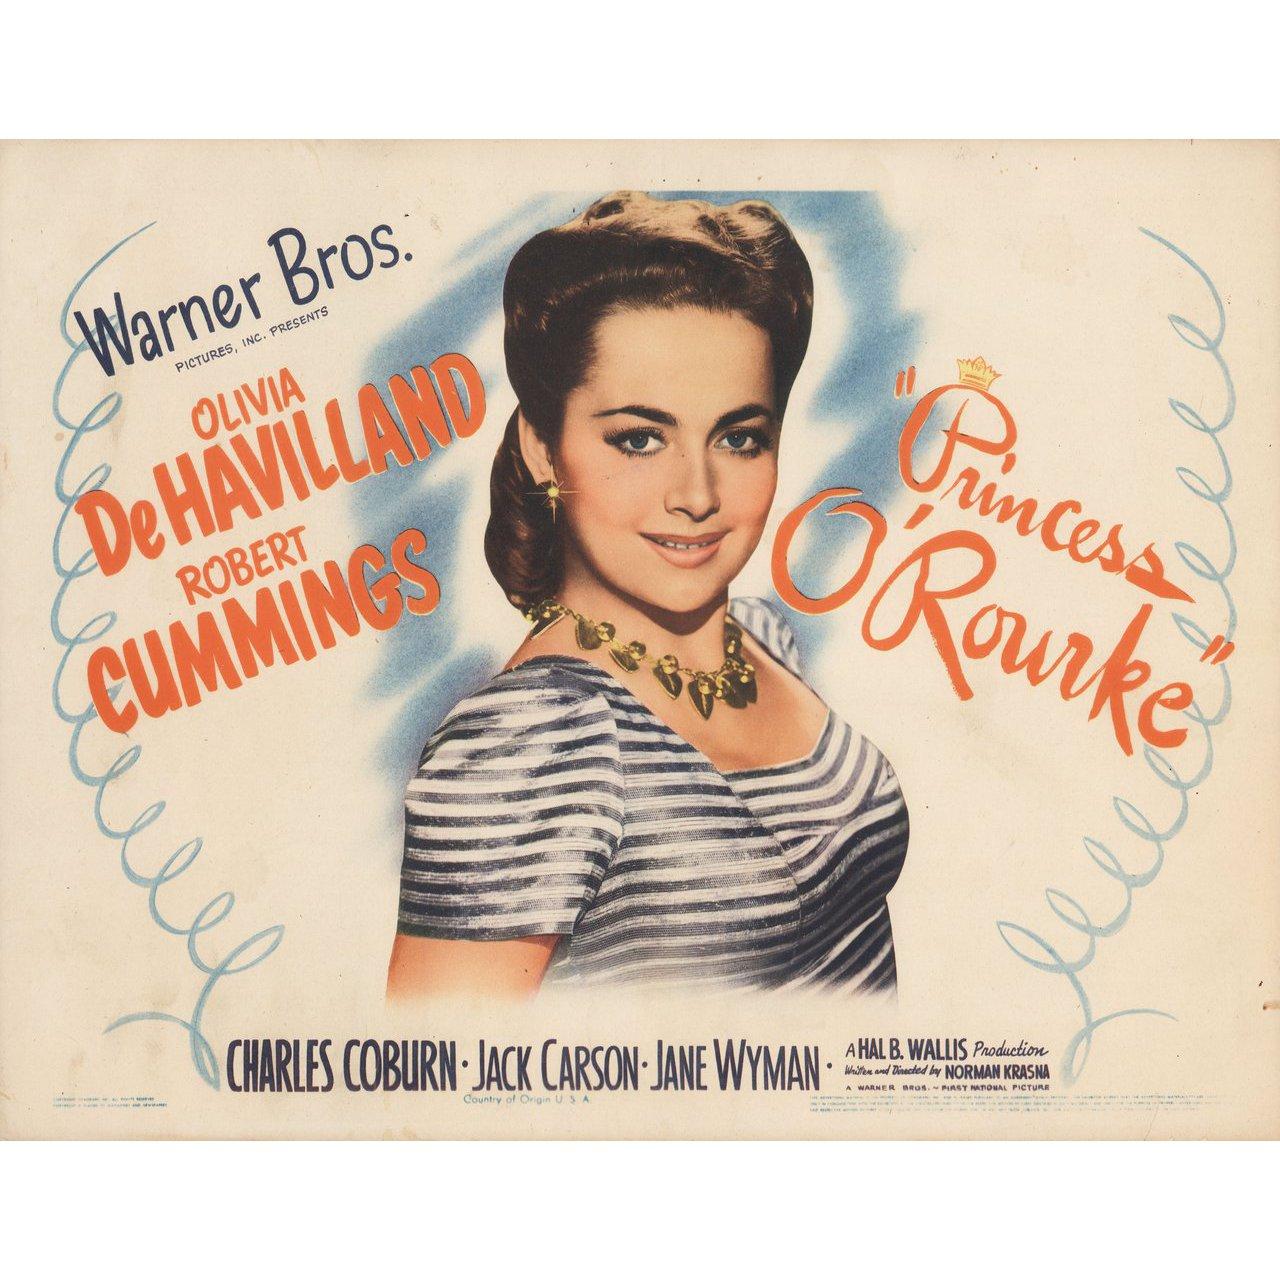 Original 1943 U.S. title card for the film Princess O'Rourke directed by Norman Krasna with Olivia de Havilland / Robert Cummings / Charles Coburn / Jack Carson. Very good-fine condition. Please note: the size is stated in inches and the actual size